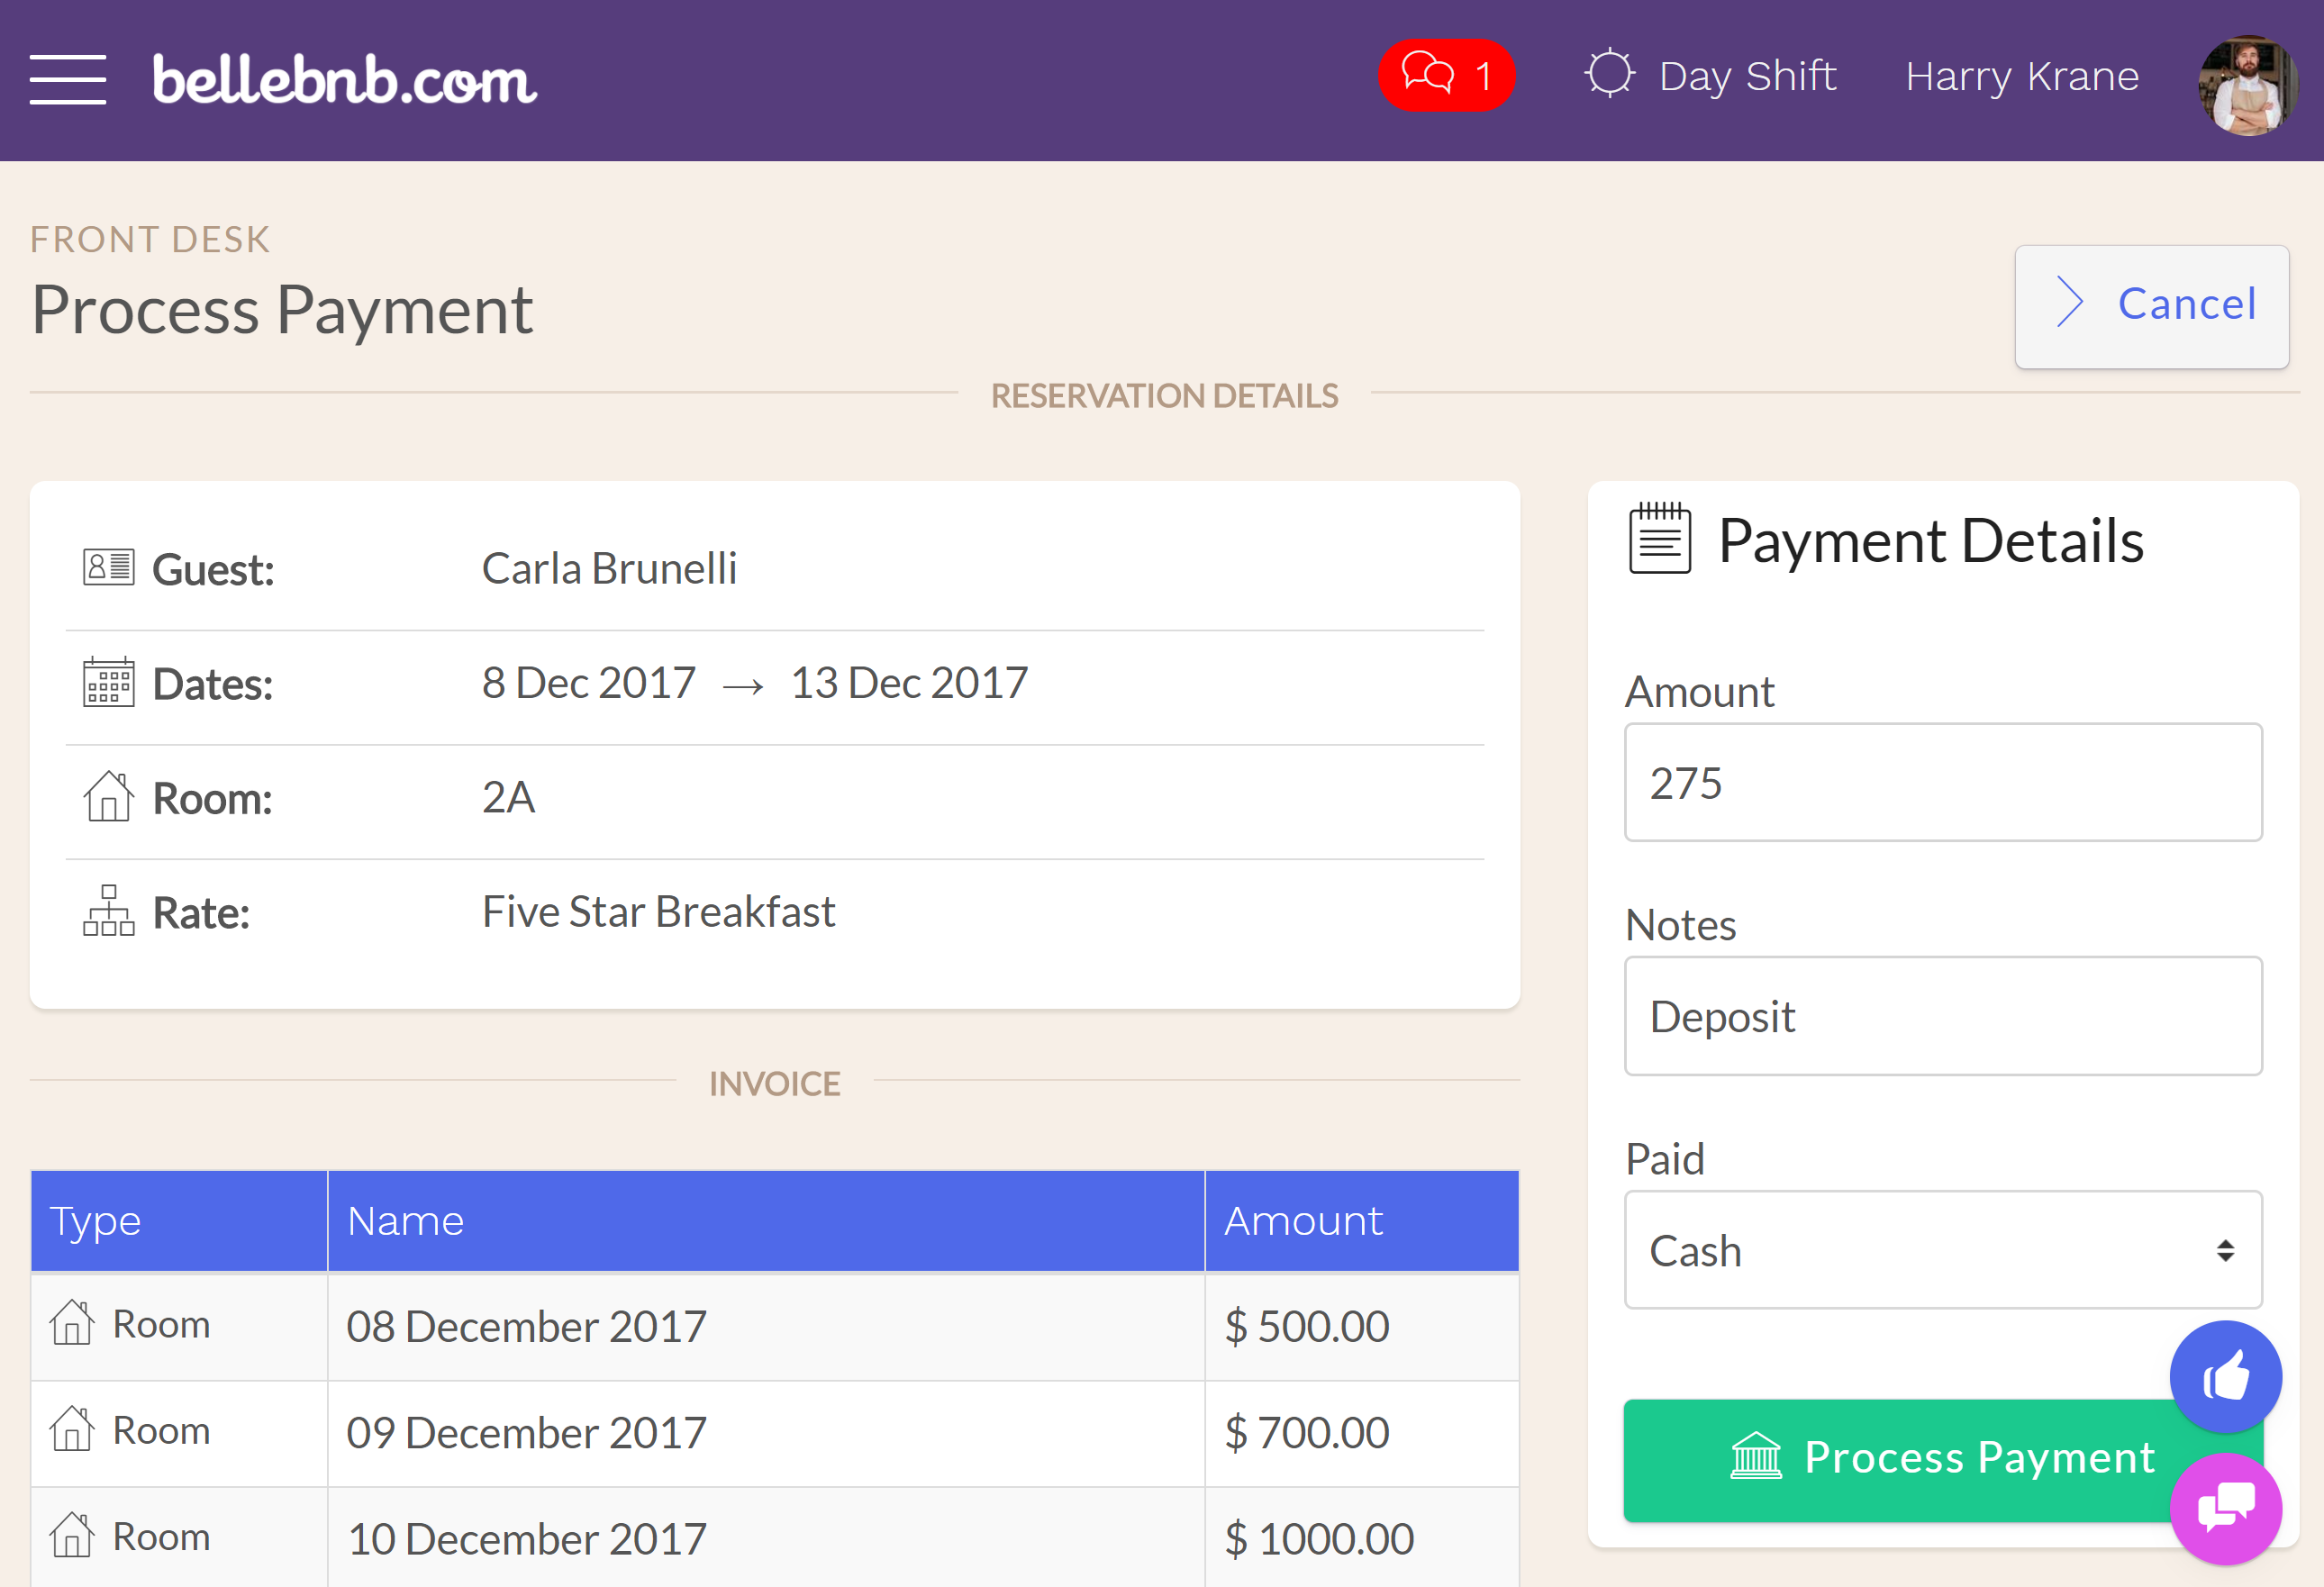 Before you check in this guest, let’s process a payment. Click ‘Actions > Process a Payment,’ then enter an amount for a deposit (no more than the total) and click to process the payment.